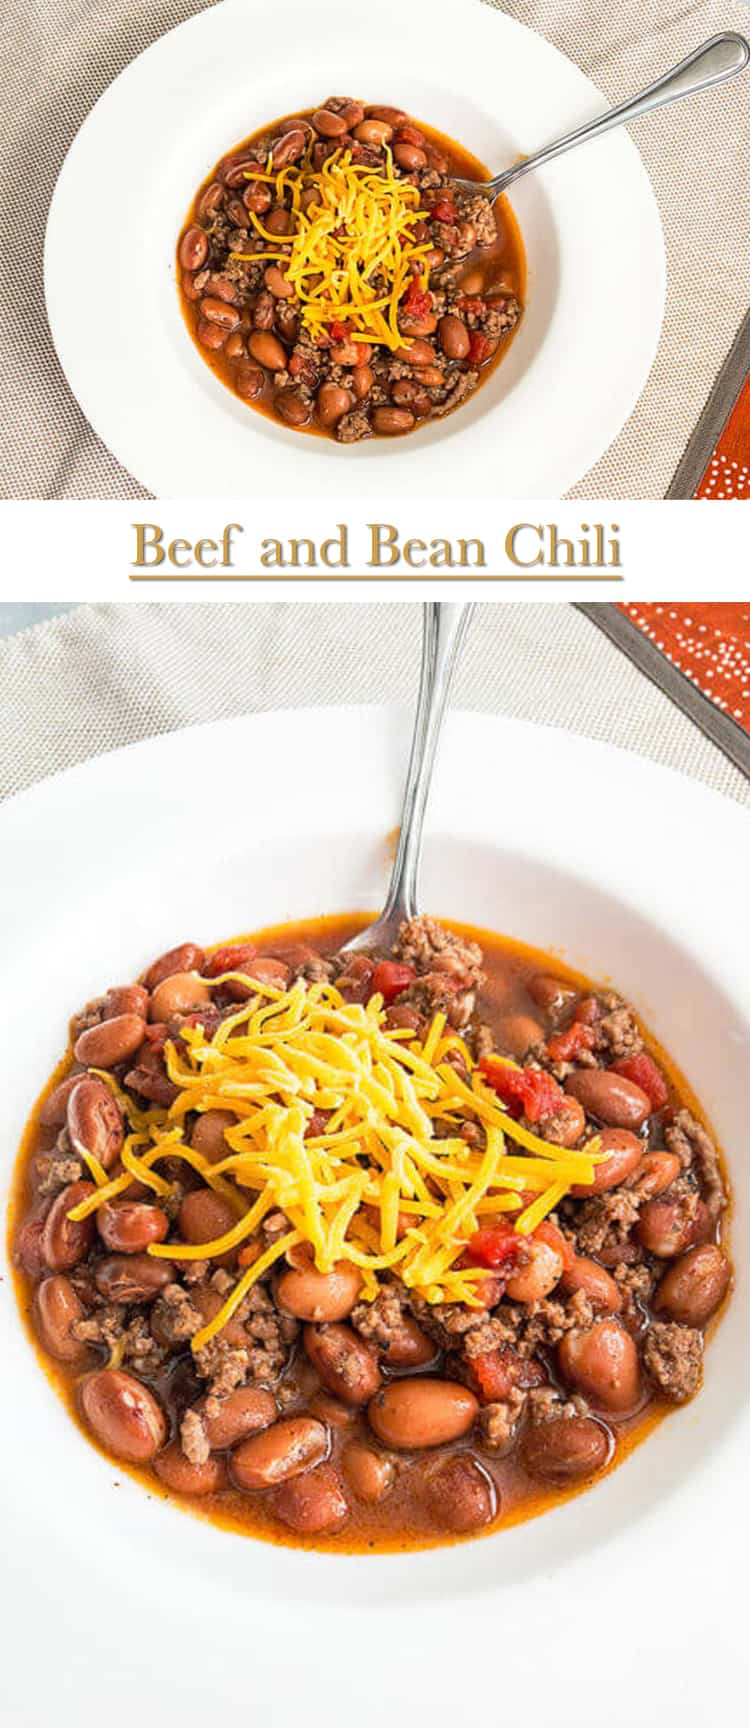 Beef and Bean Chili